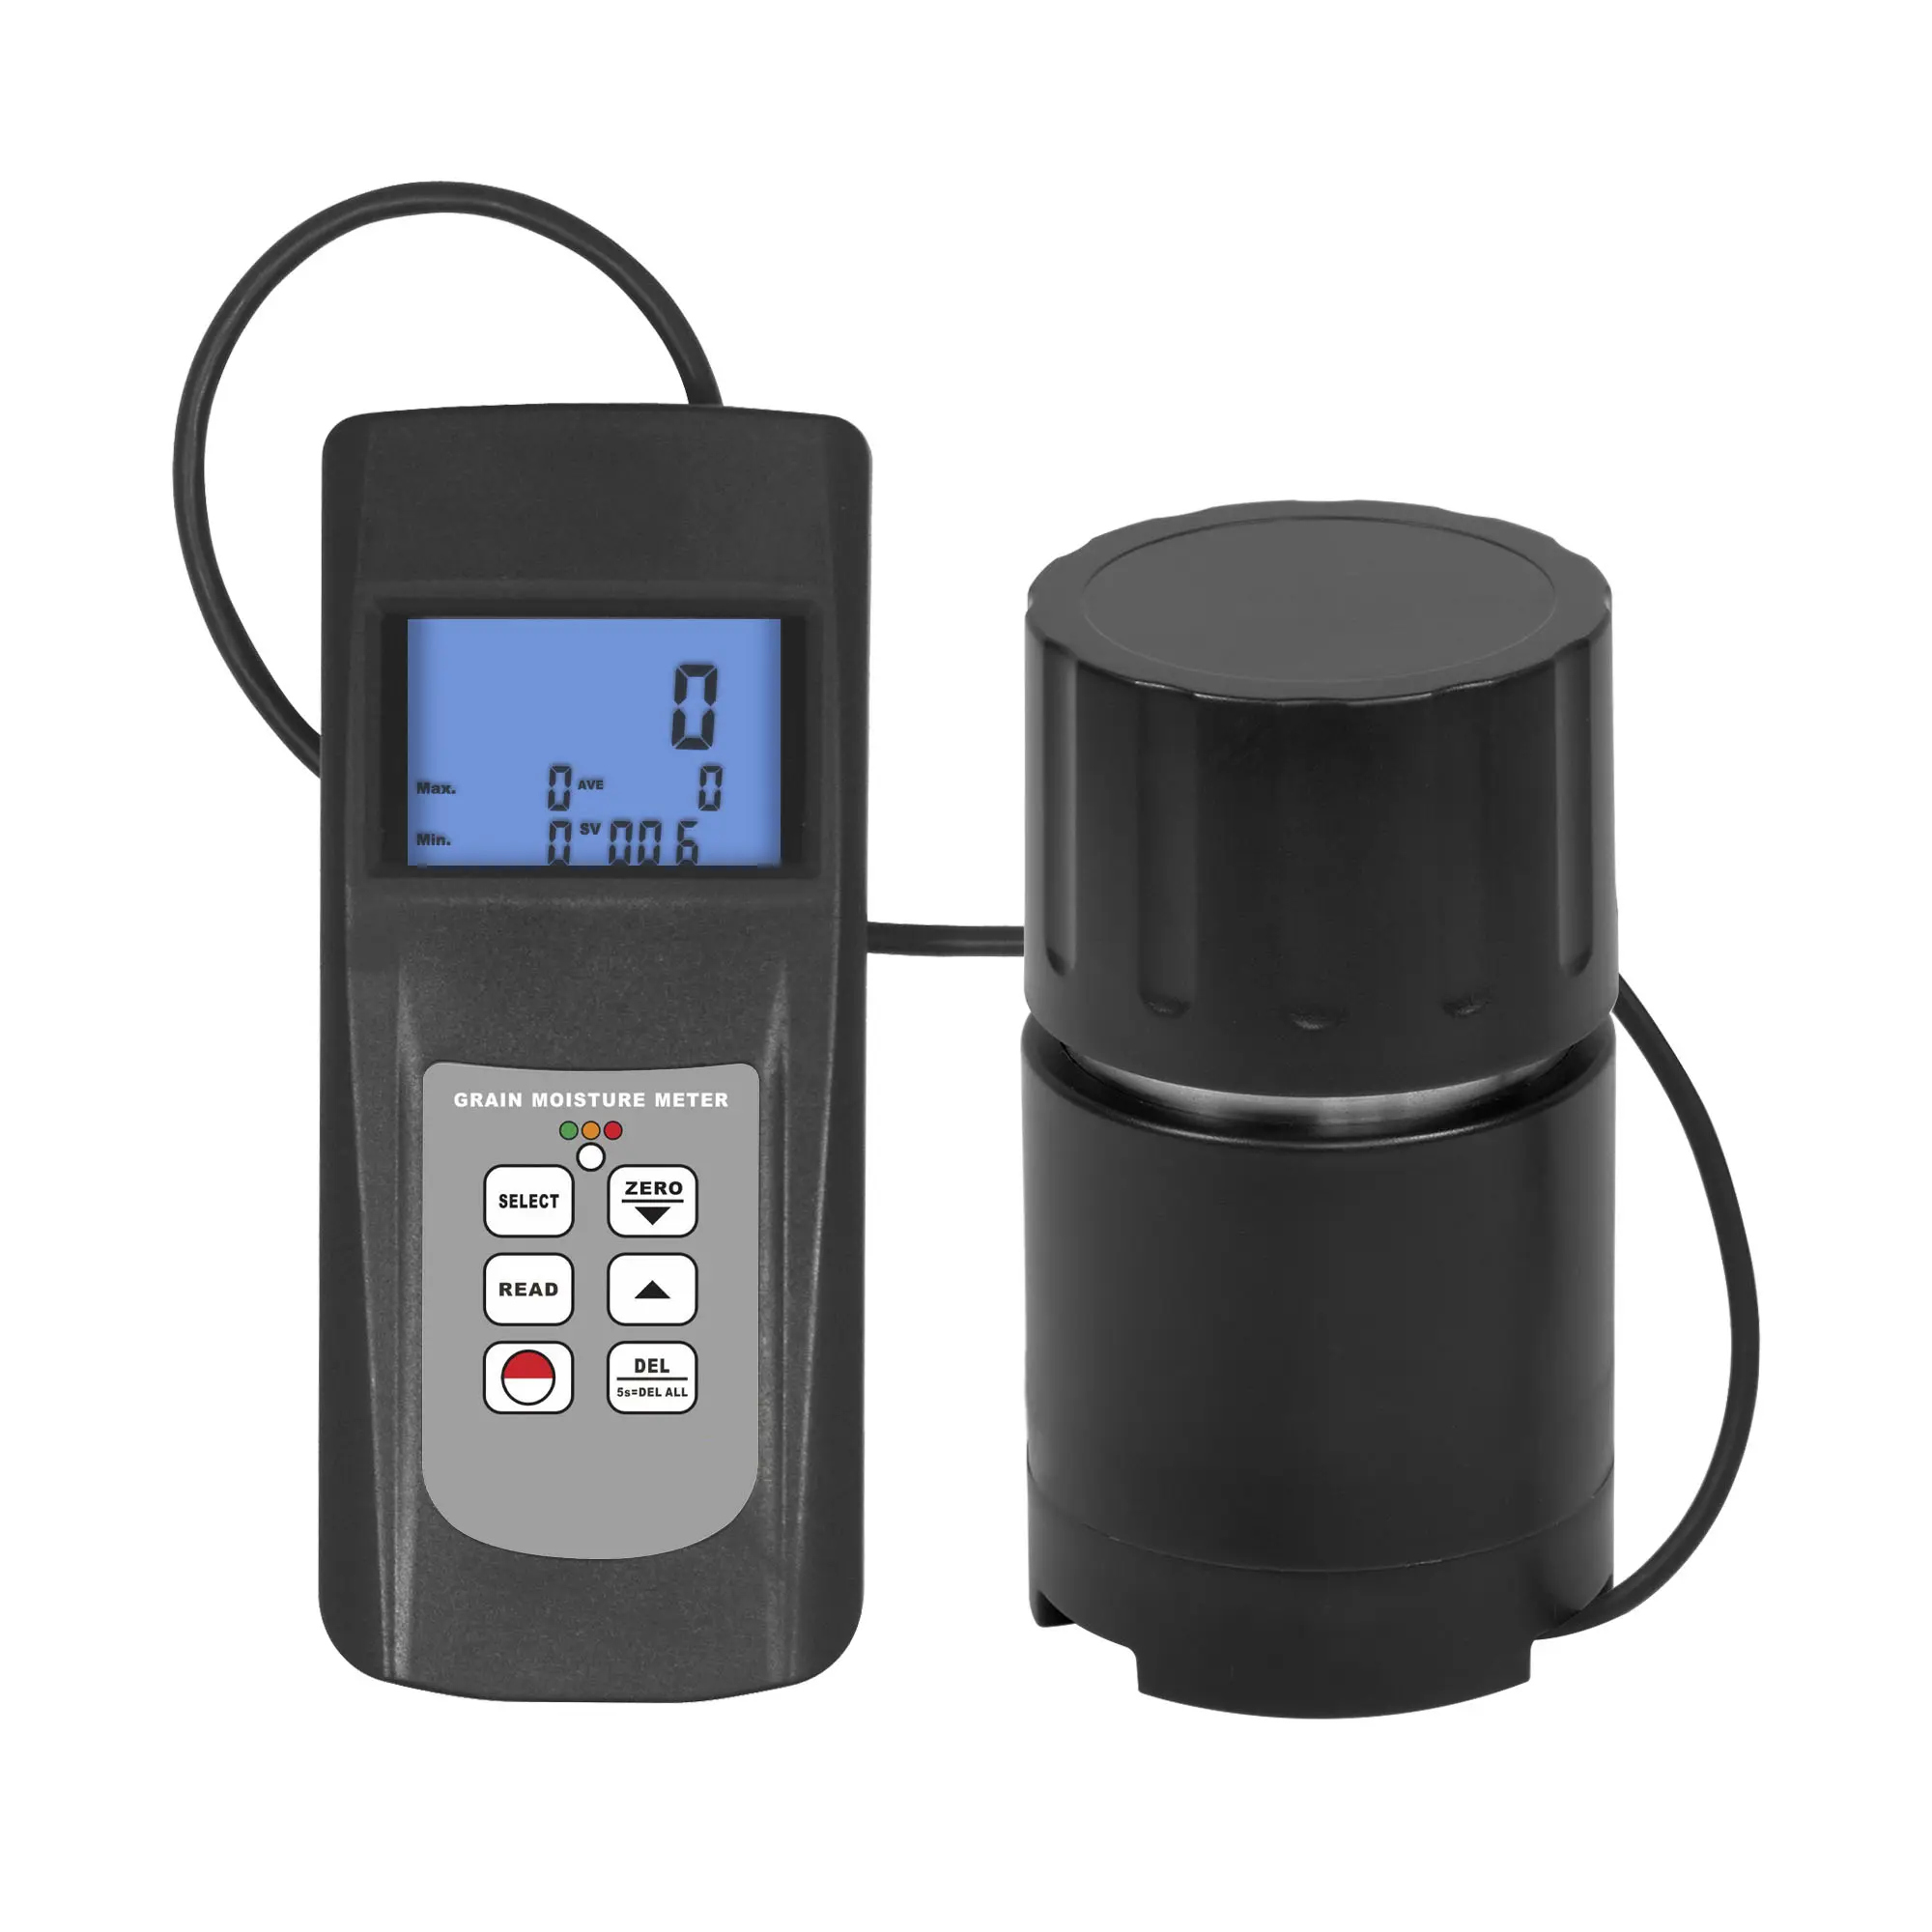 Gray Body Color Grain Moisture Meter for Coffee & Cacao Bean MC-7828G with storage and statistical functions